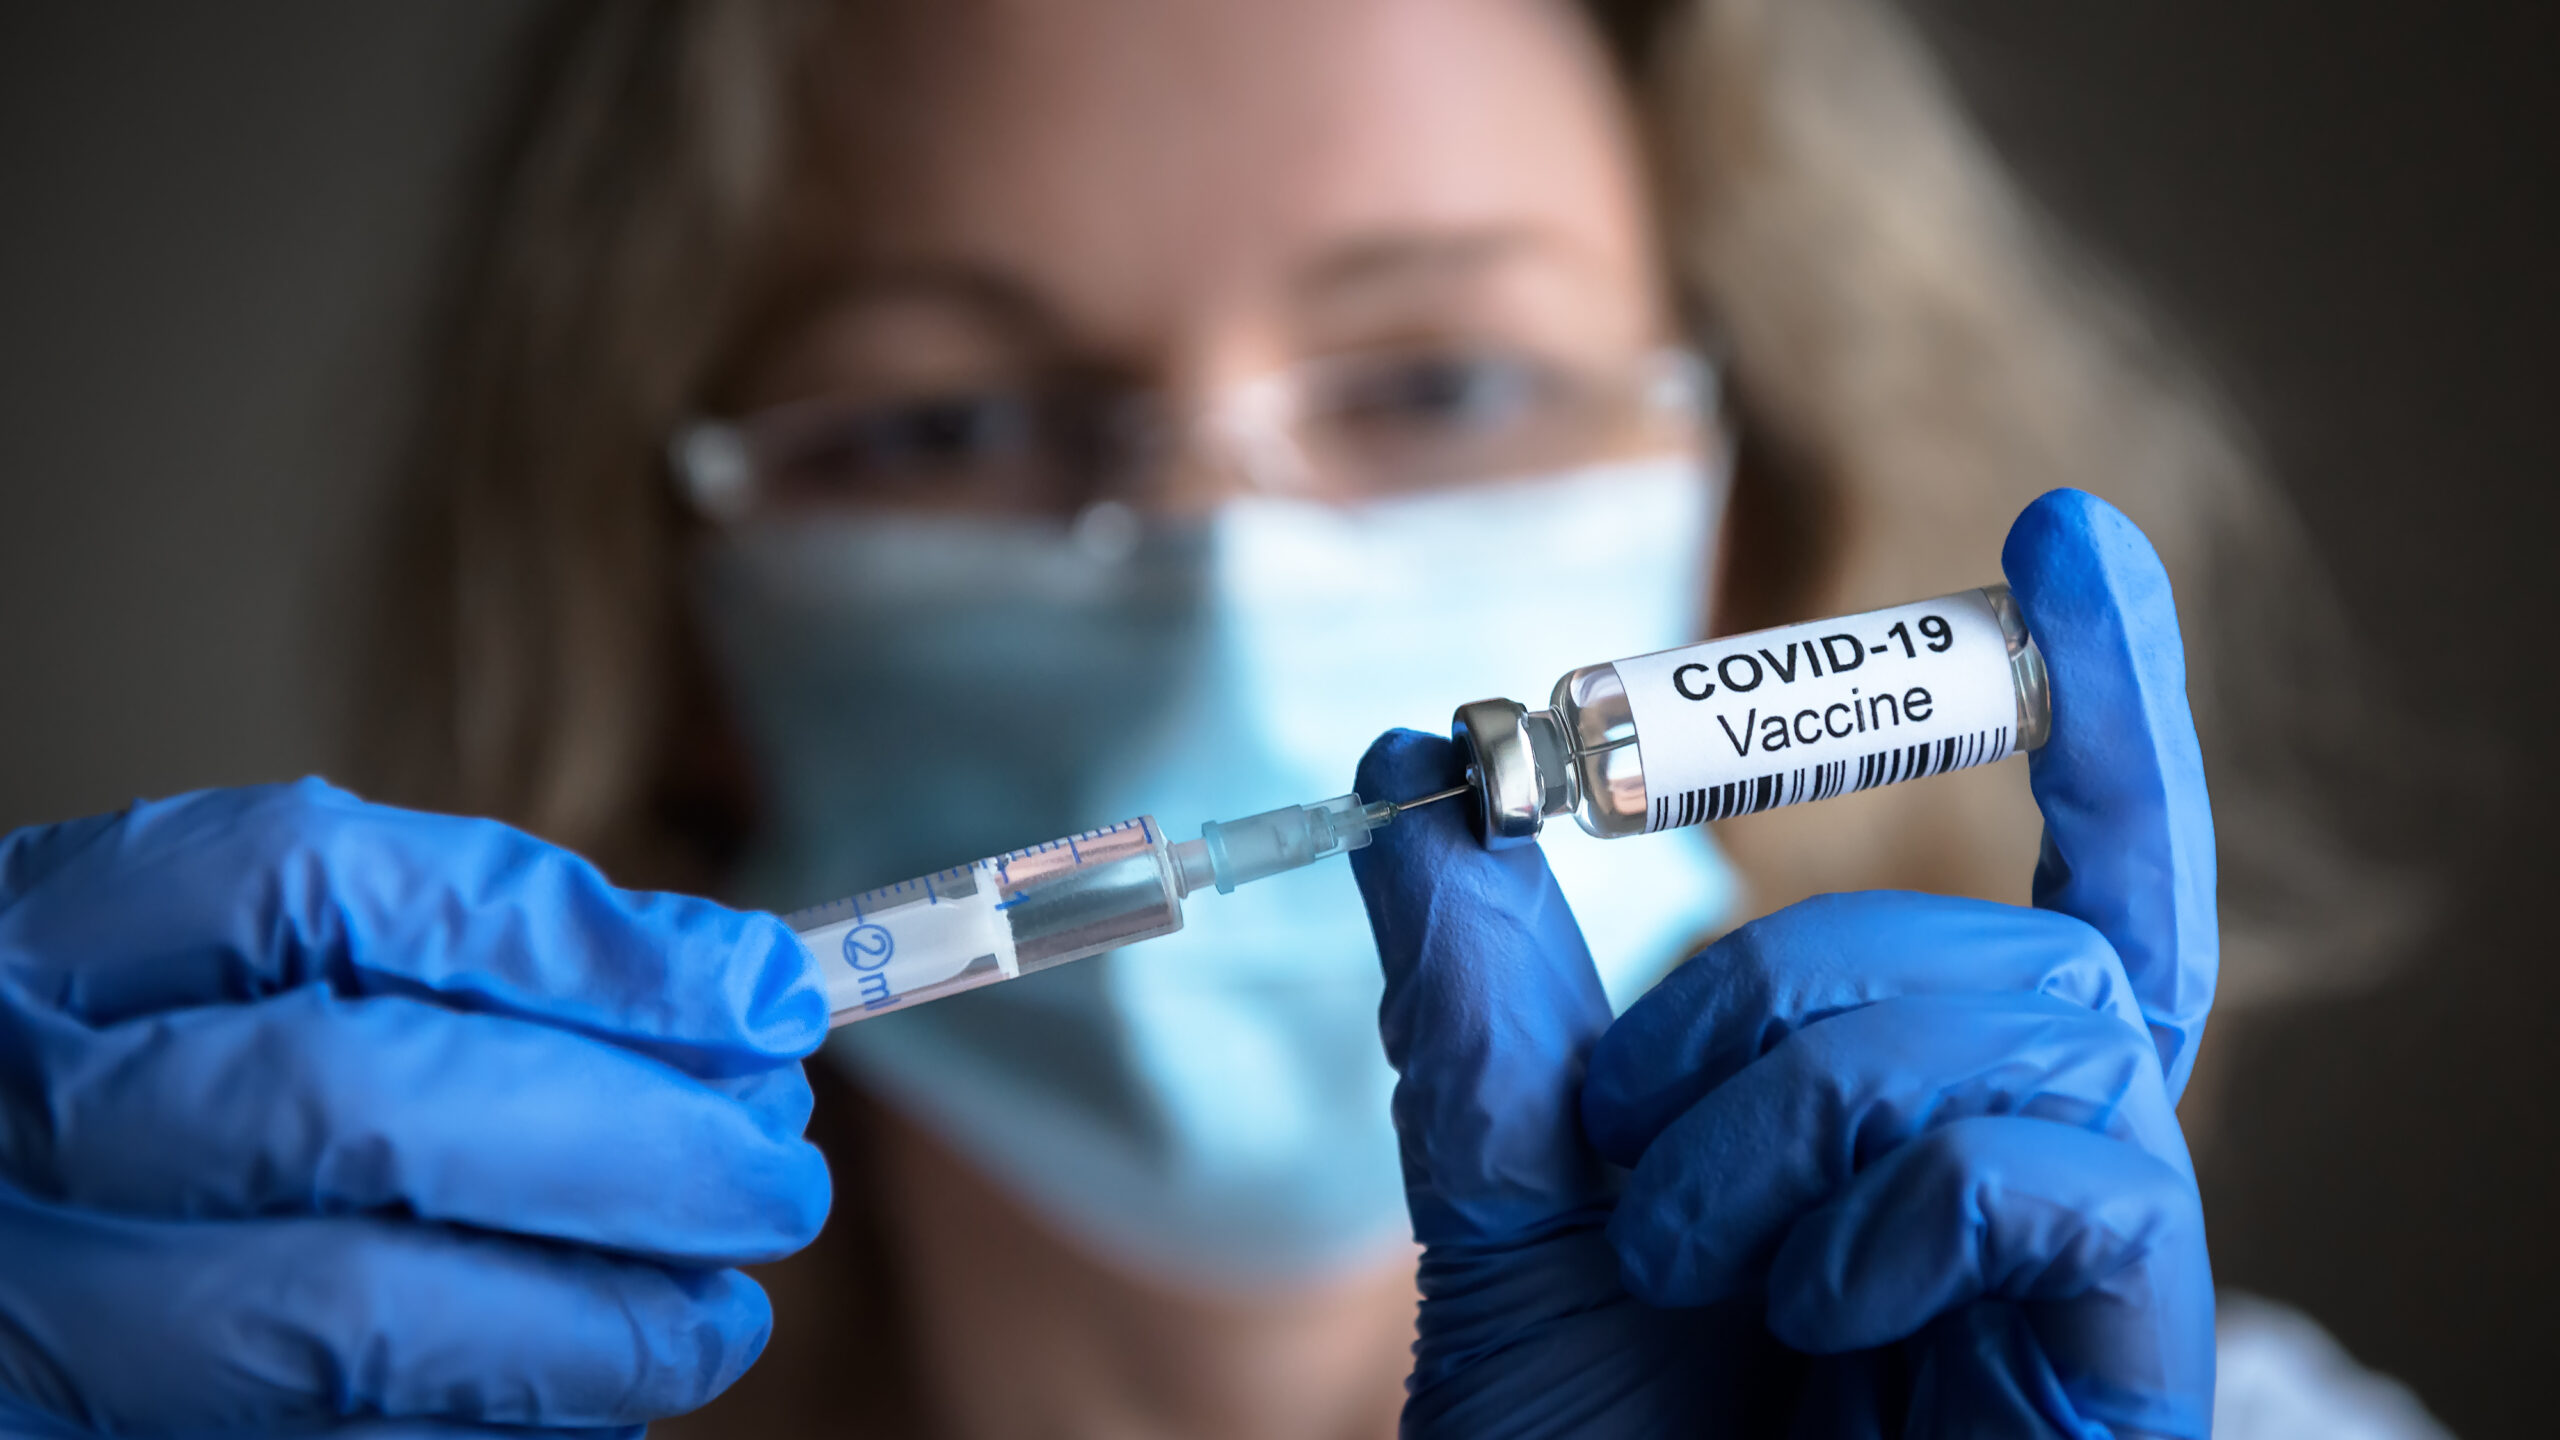 A health professional drawing a COVID-19 vaccine into a syringe